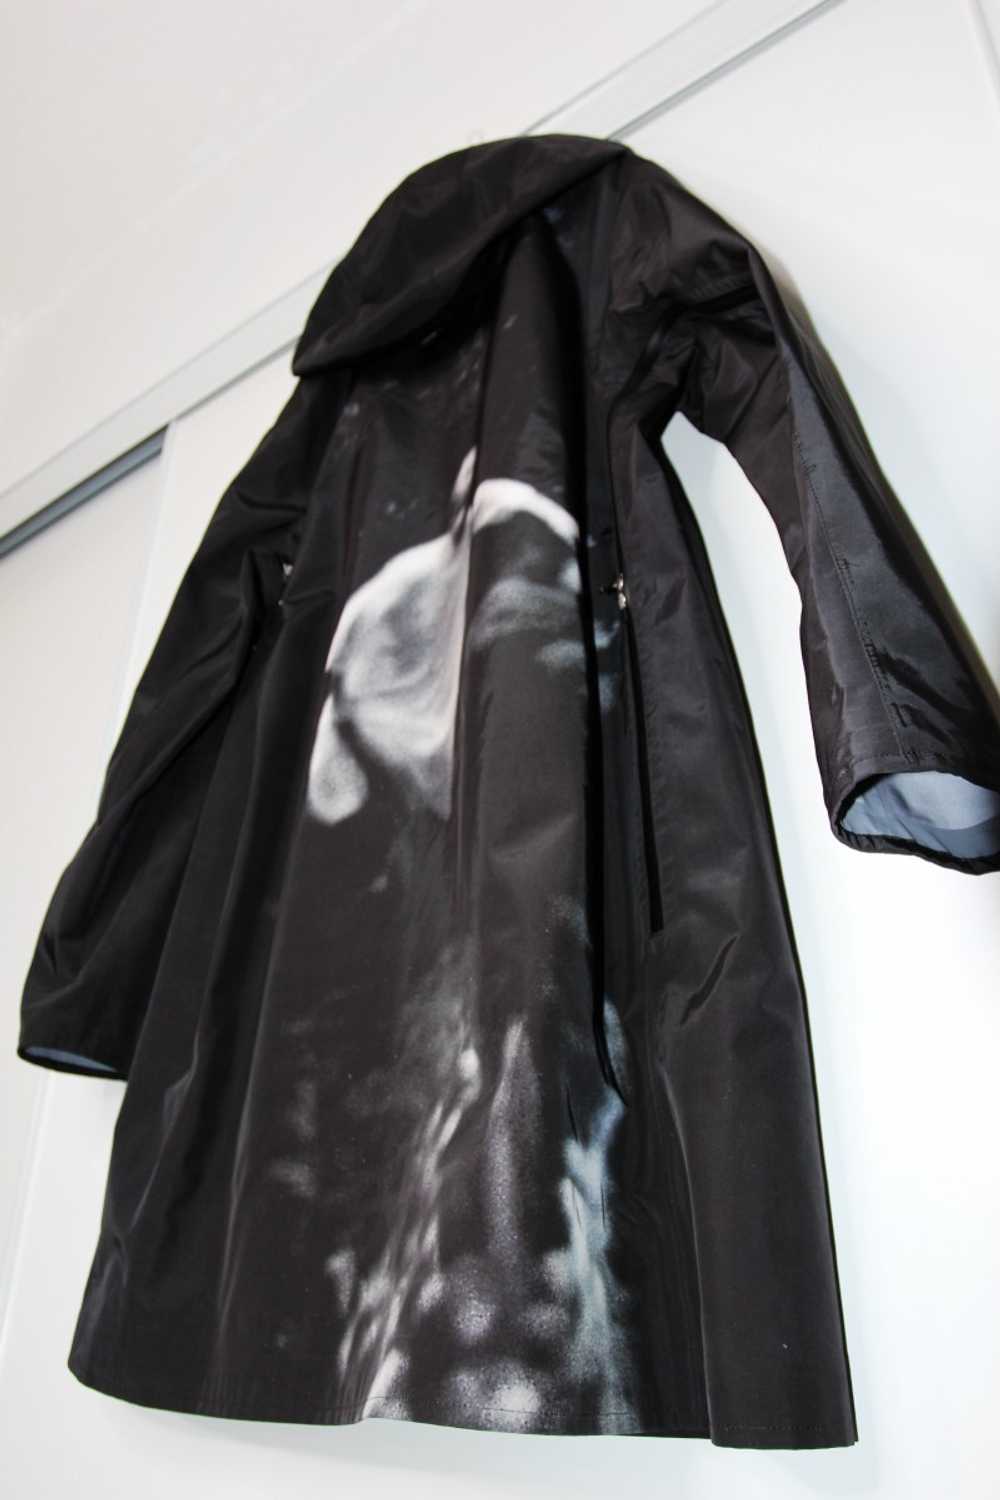 BNWT SS20 UNDERCOVER CINDY SHERMAN PARKA COAT 3 - image 12